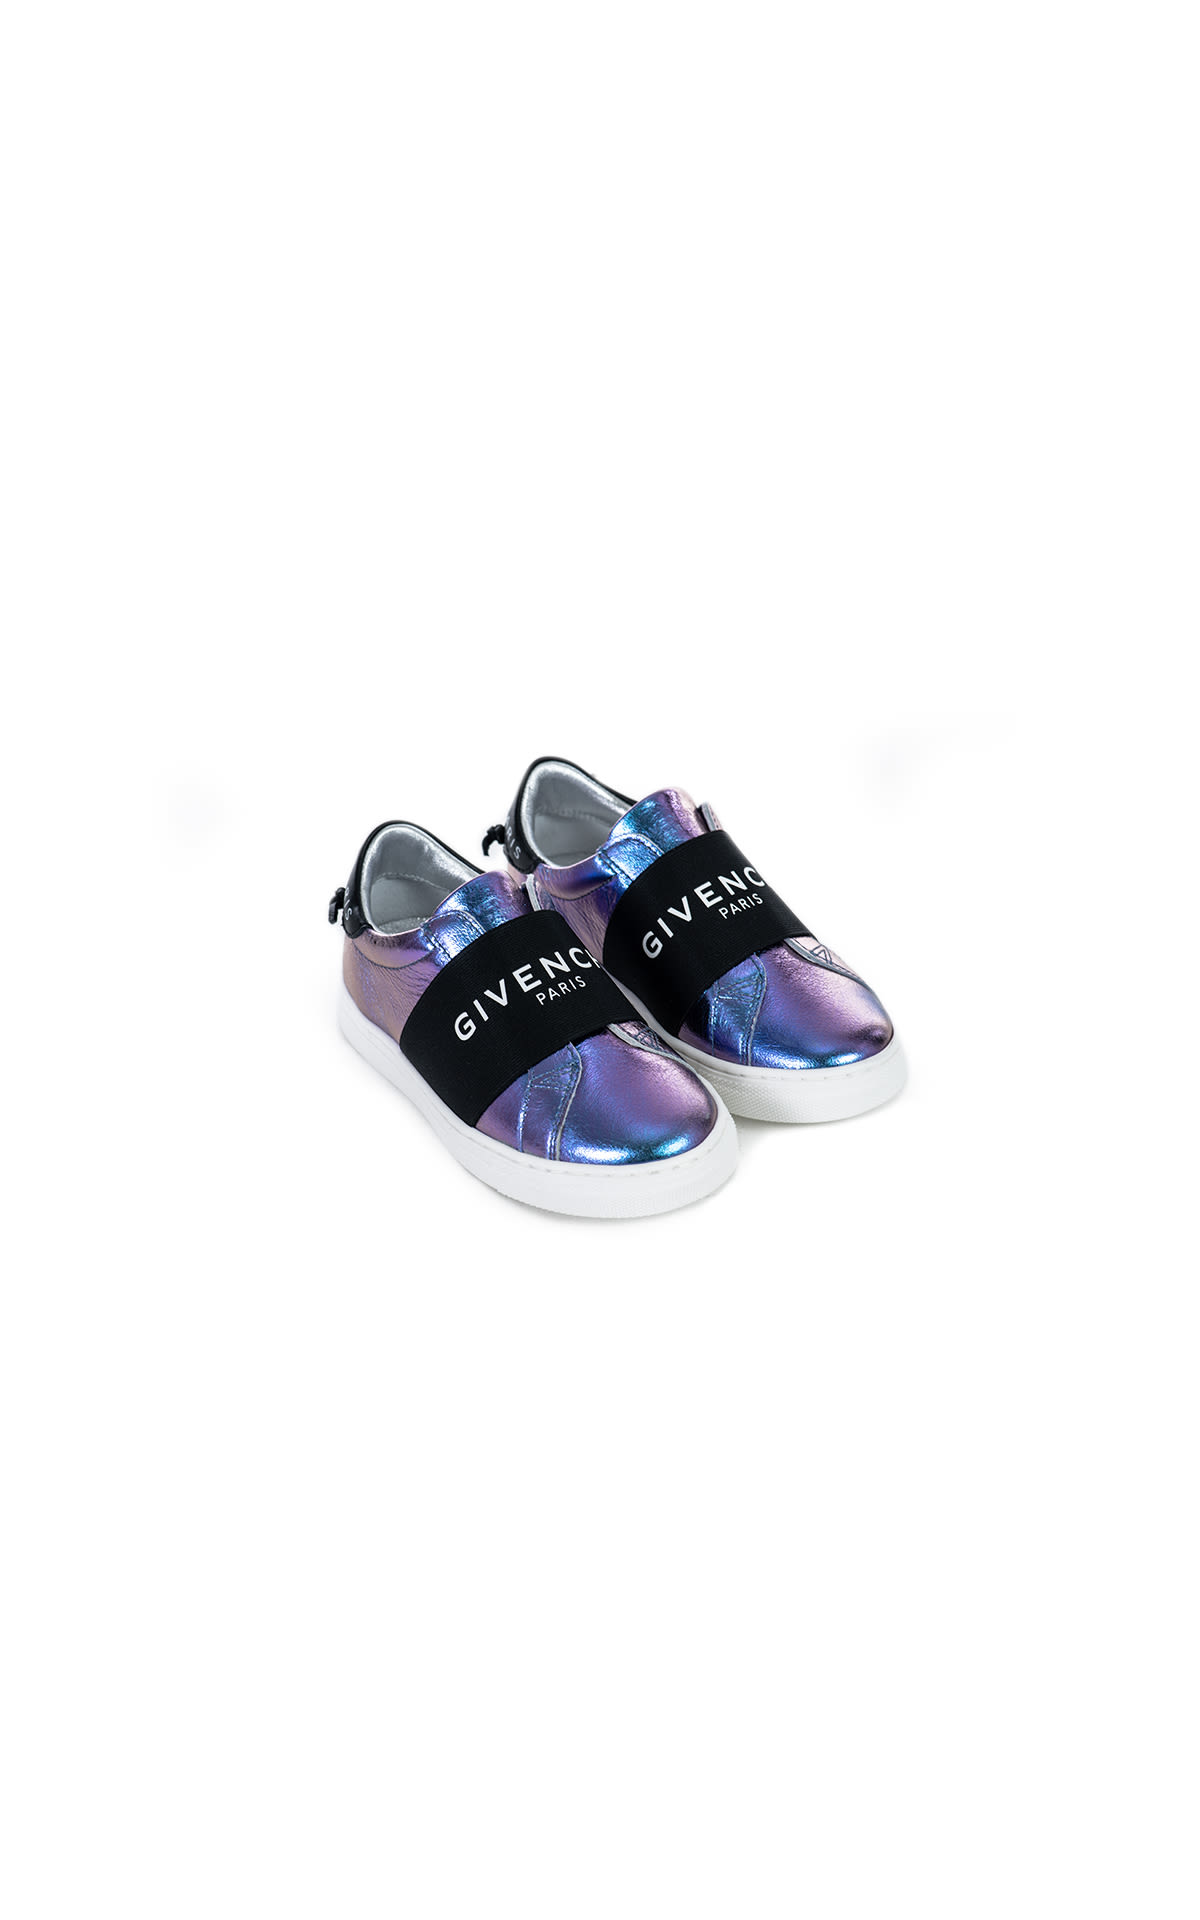 Kids Around Givenchy sneaker